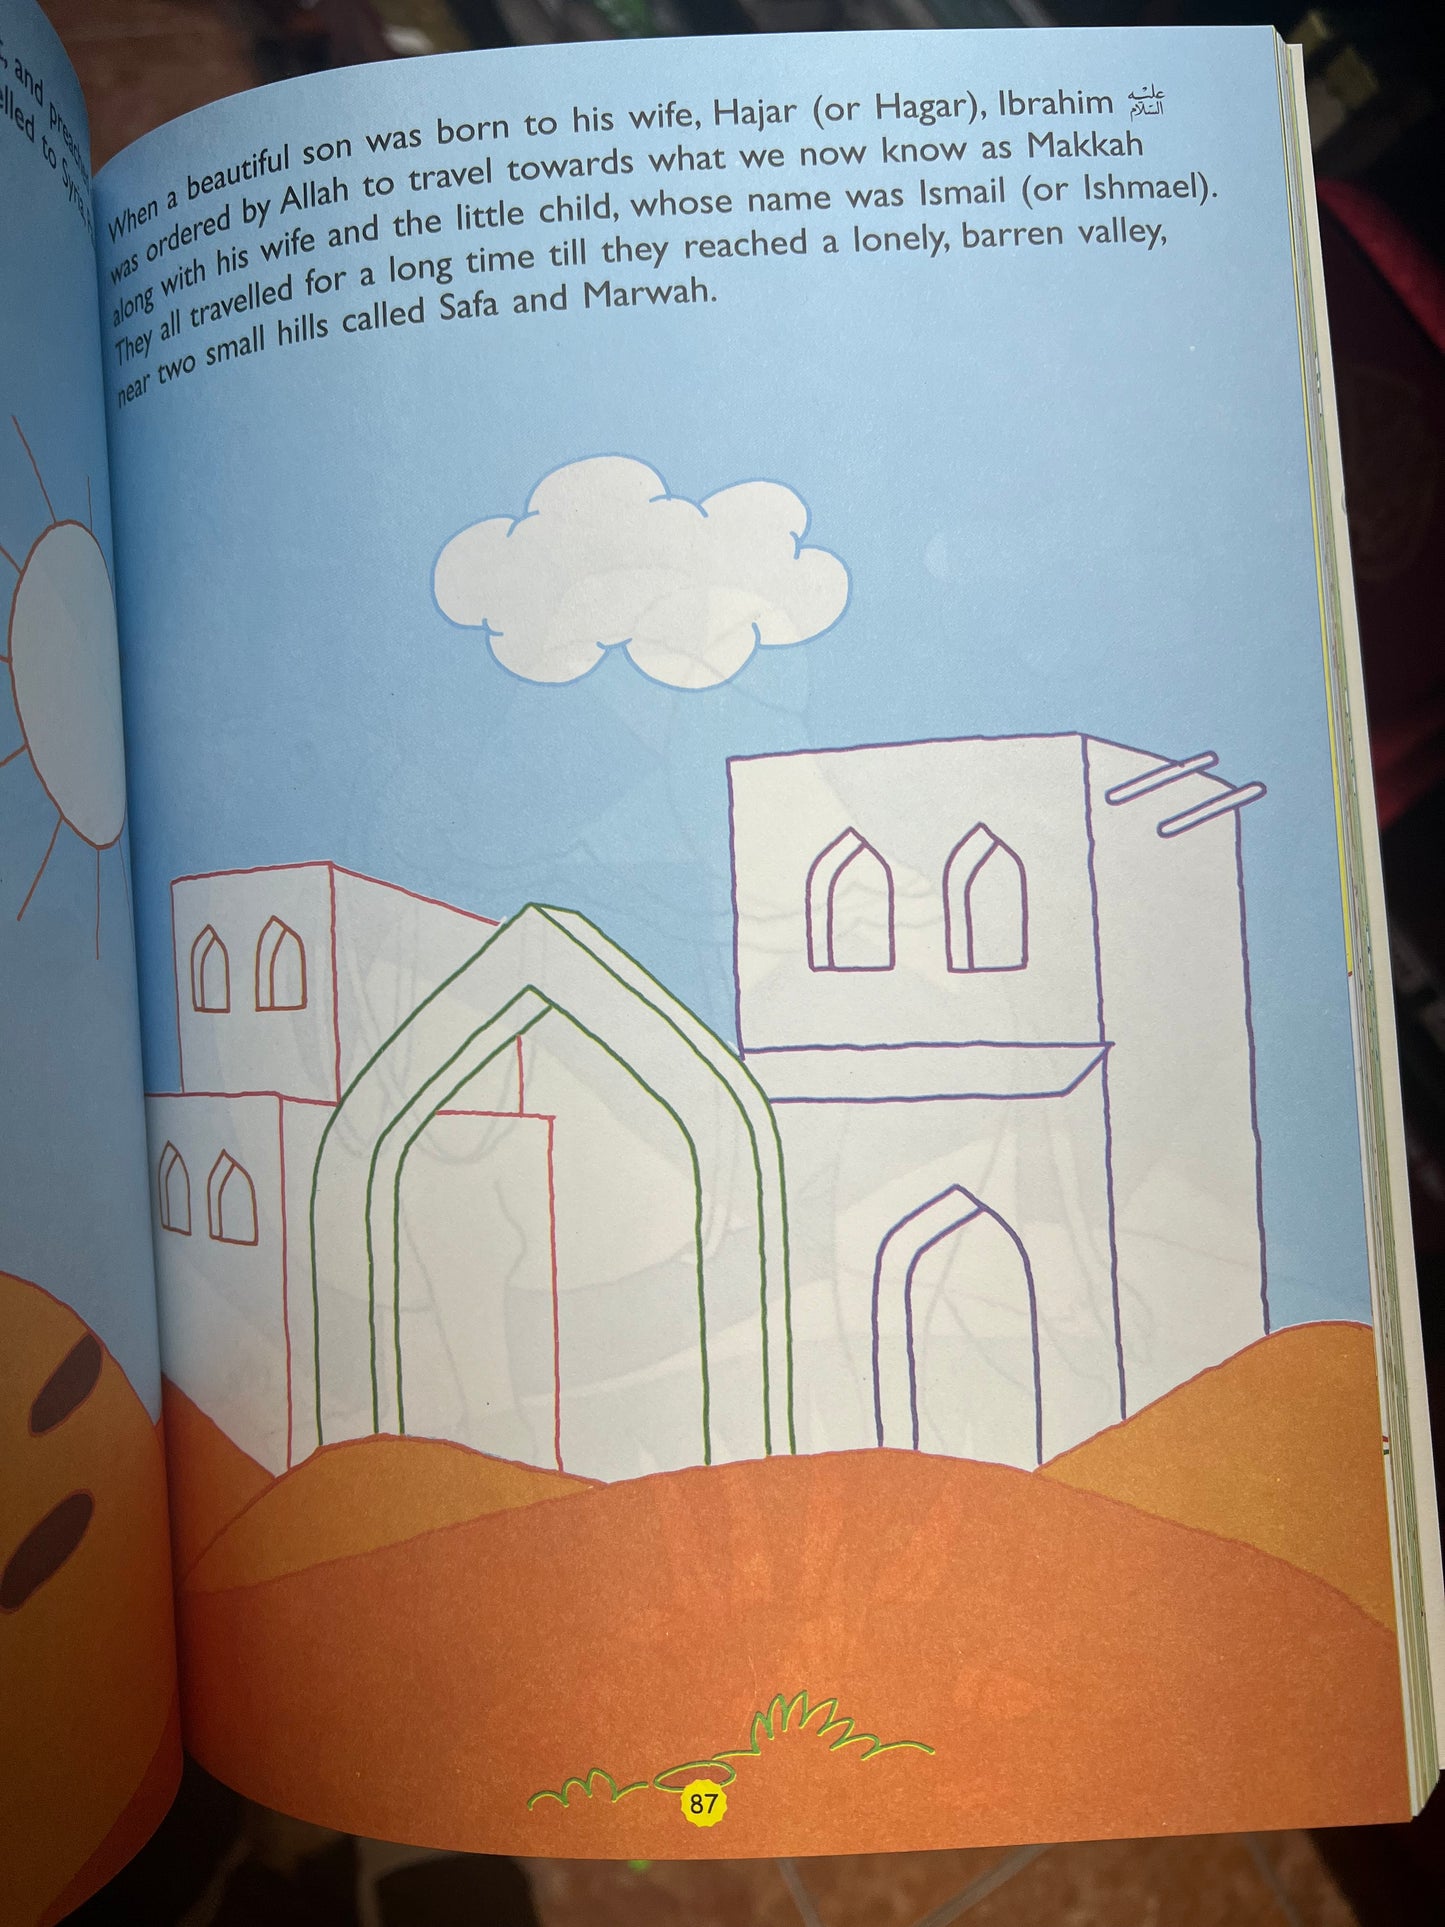 Stories from the Quran Big Coloring Book